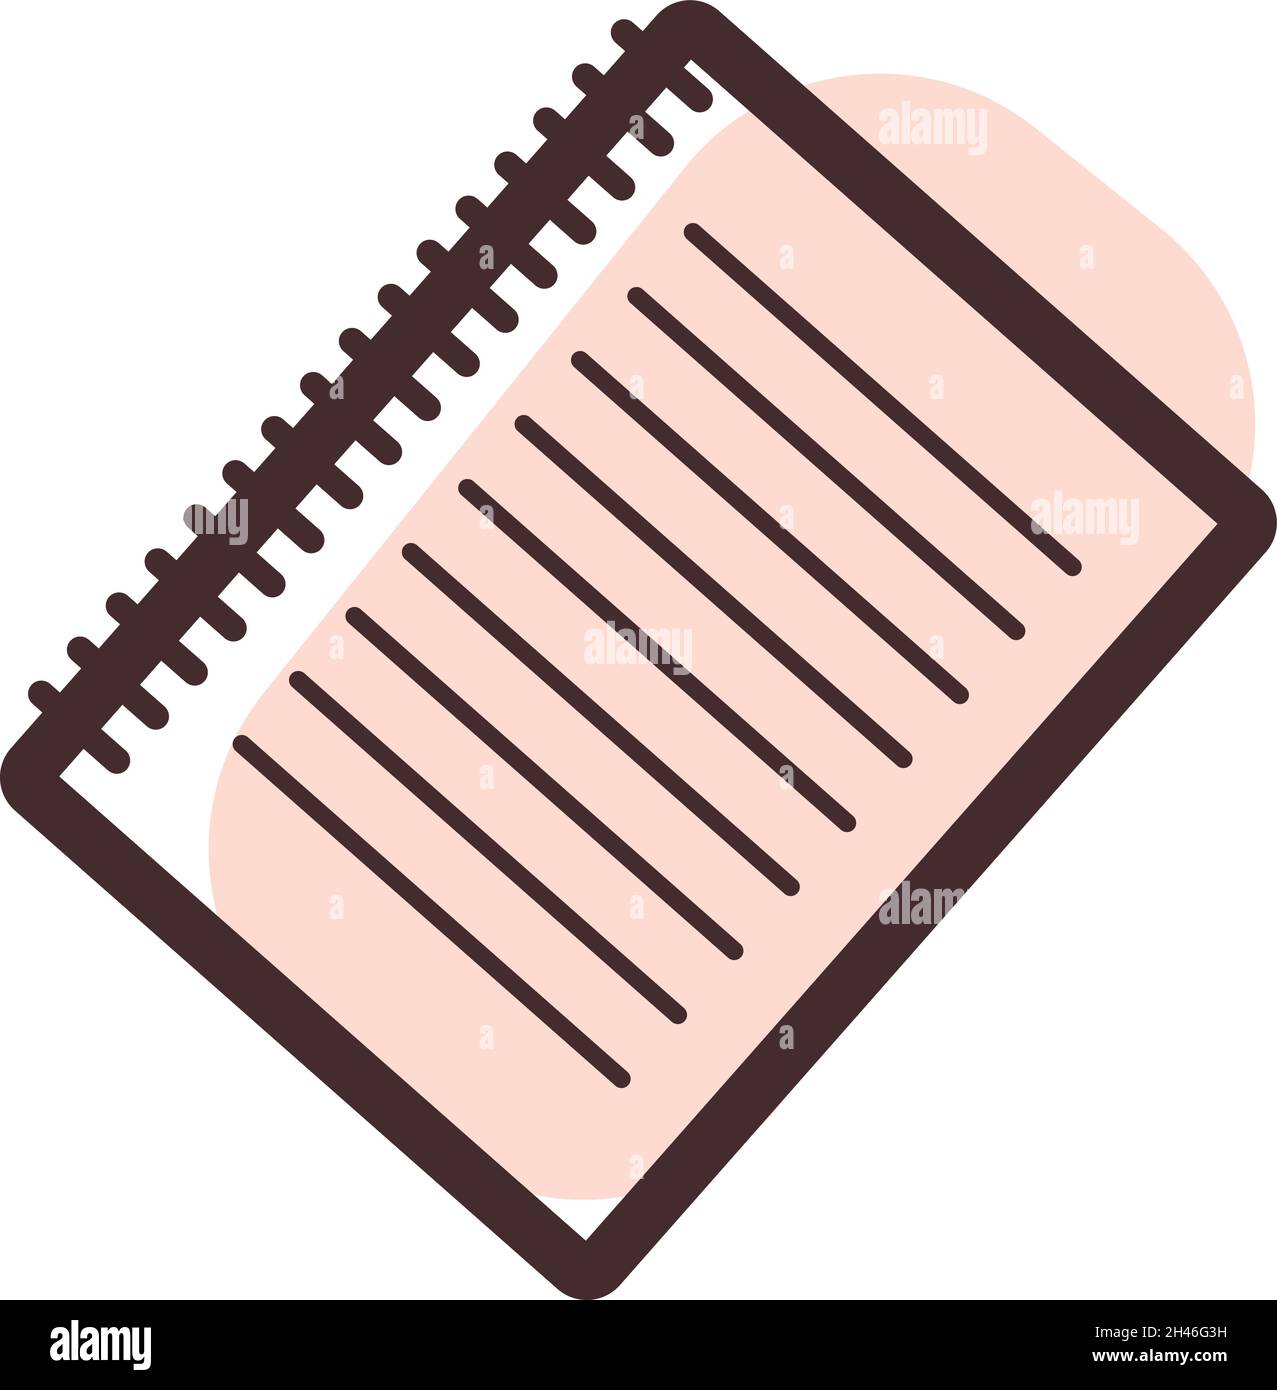 School paper, illustration, vector, on a white background. Stock Vector